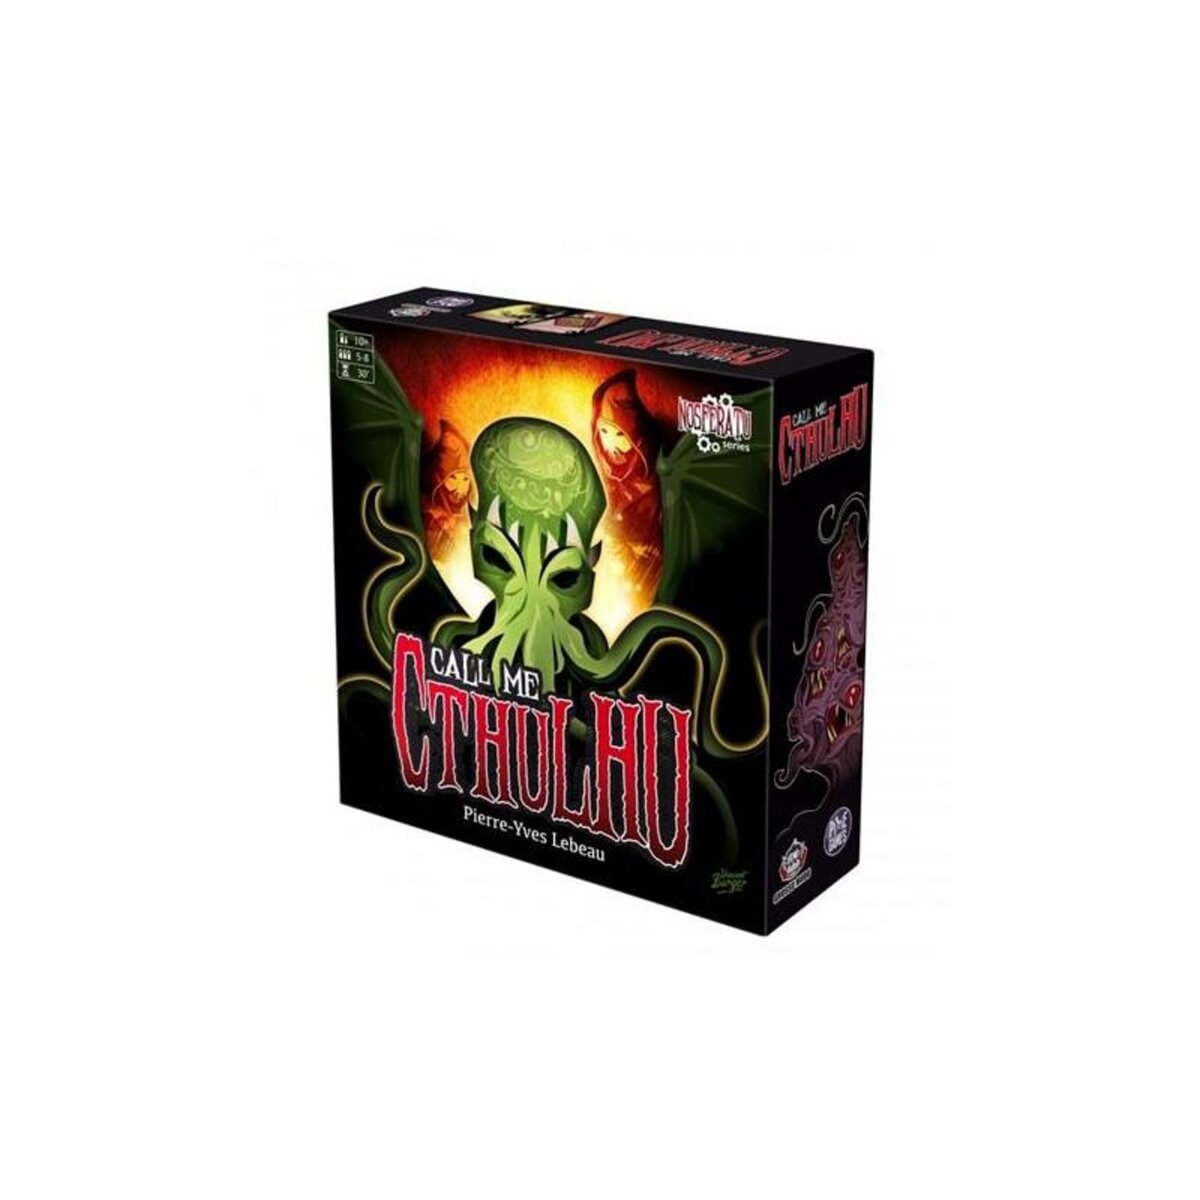 Jeu d'ambiance Pixie Games Call Me Cthulhu pas cher 